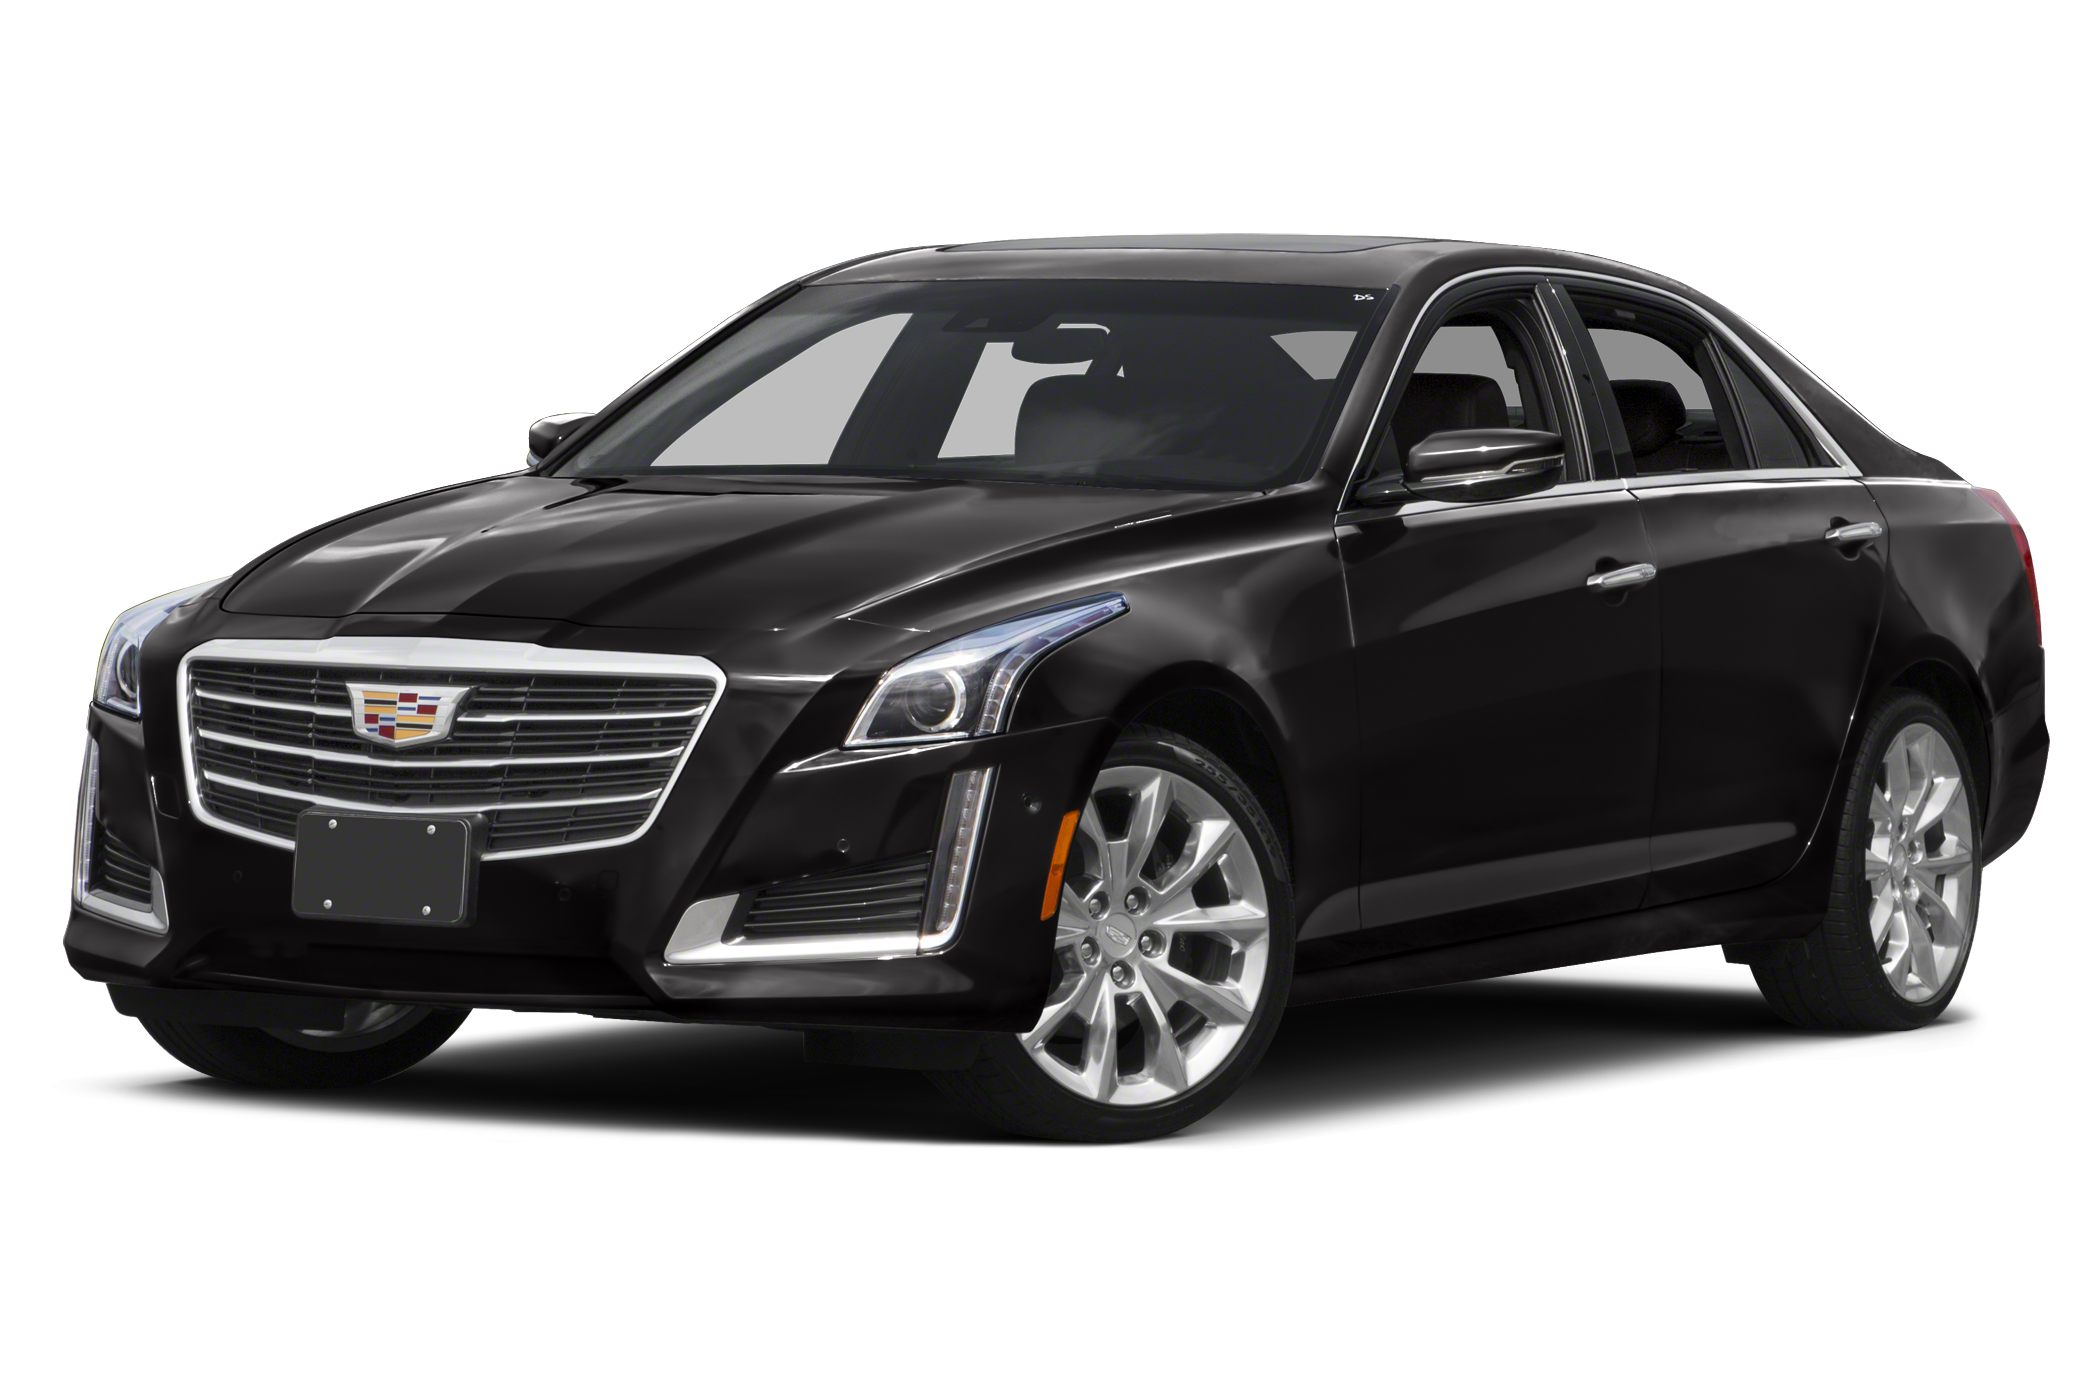 Remapping file for Cadillac CTS 2.8i 215hp | Puretuning